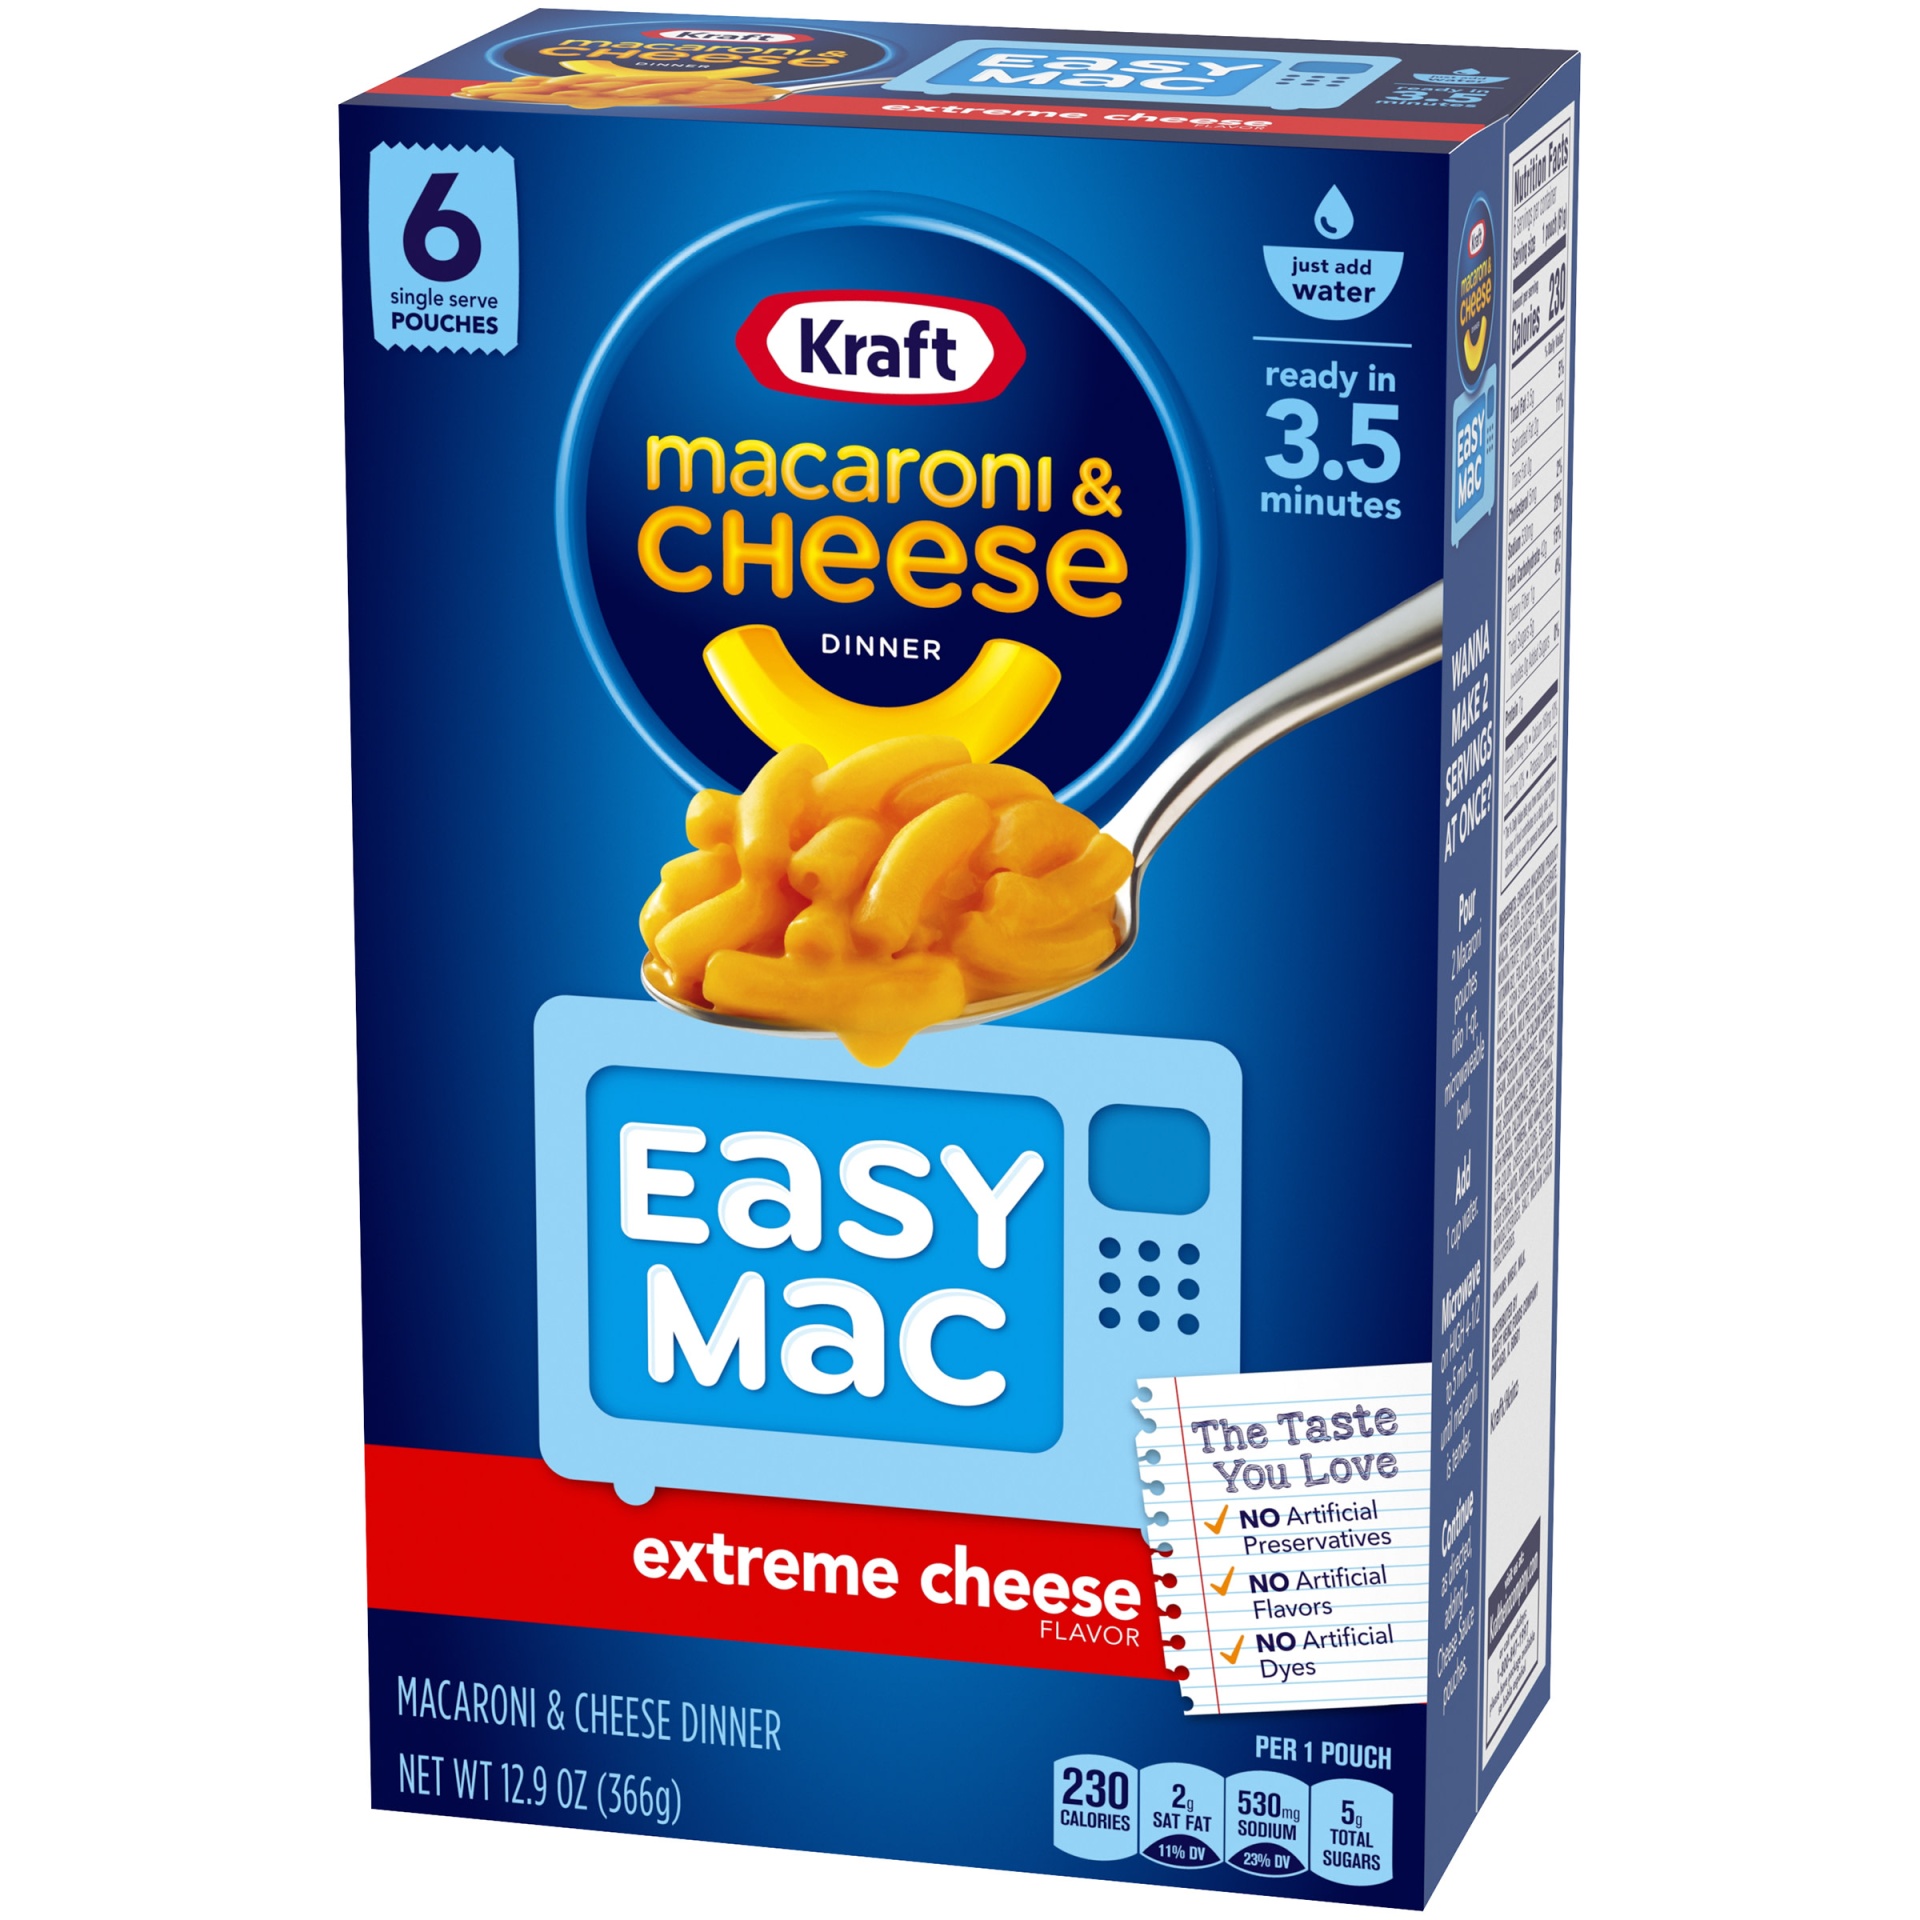 slide 4 of 7, Kraft Easy Mac Extreme Cheese Macaroni & Cheese Microwavable Dinner Packets, 6 ct; 12.9 oz